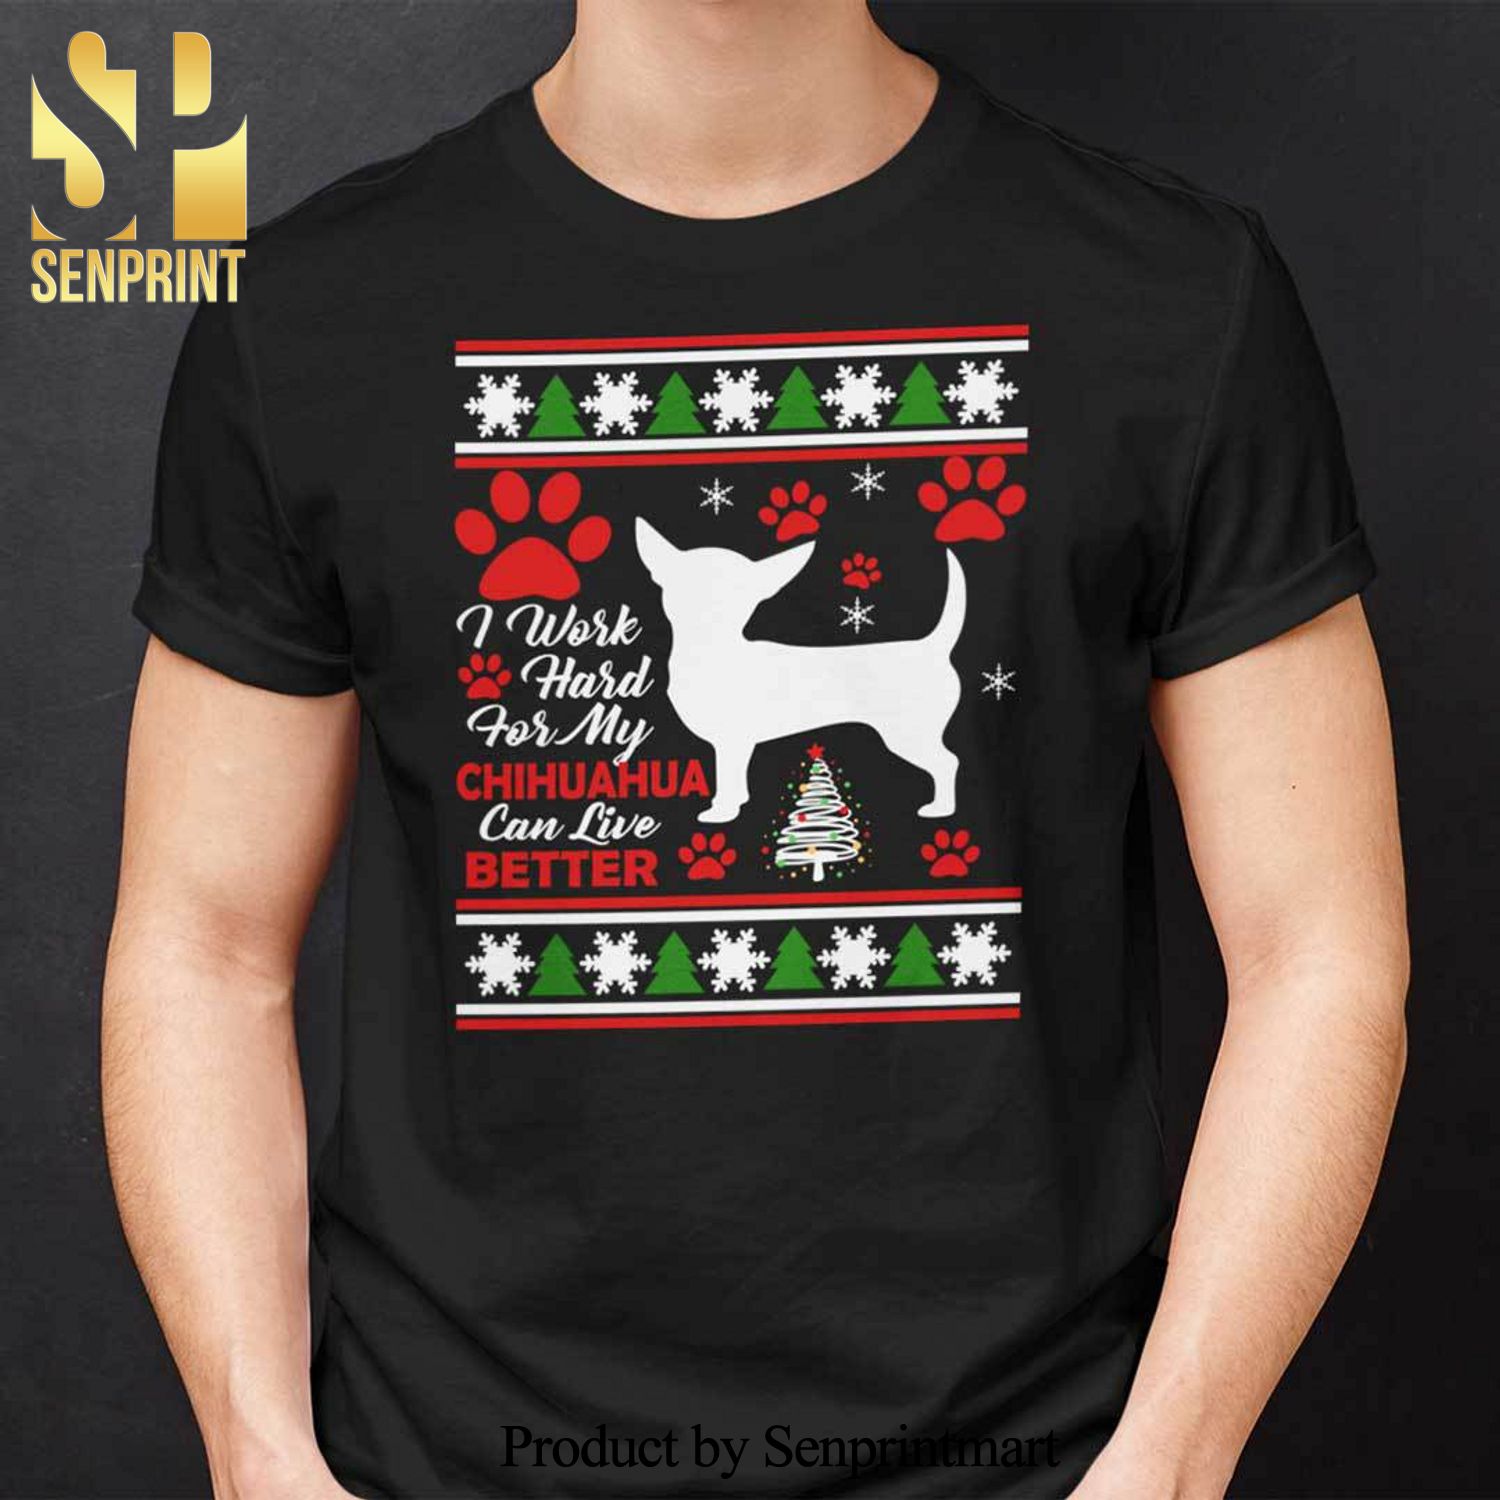 Chihuahua Christmas Gifts Shirt I Work Hard For My Chihuahua Can Live Better